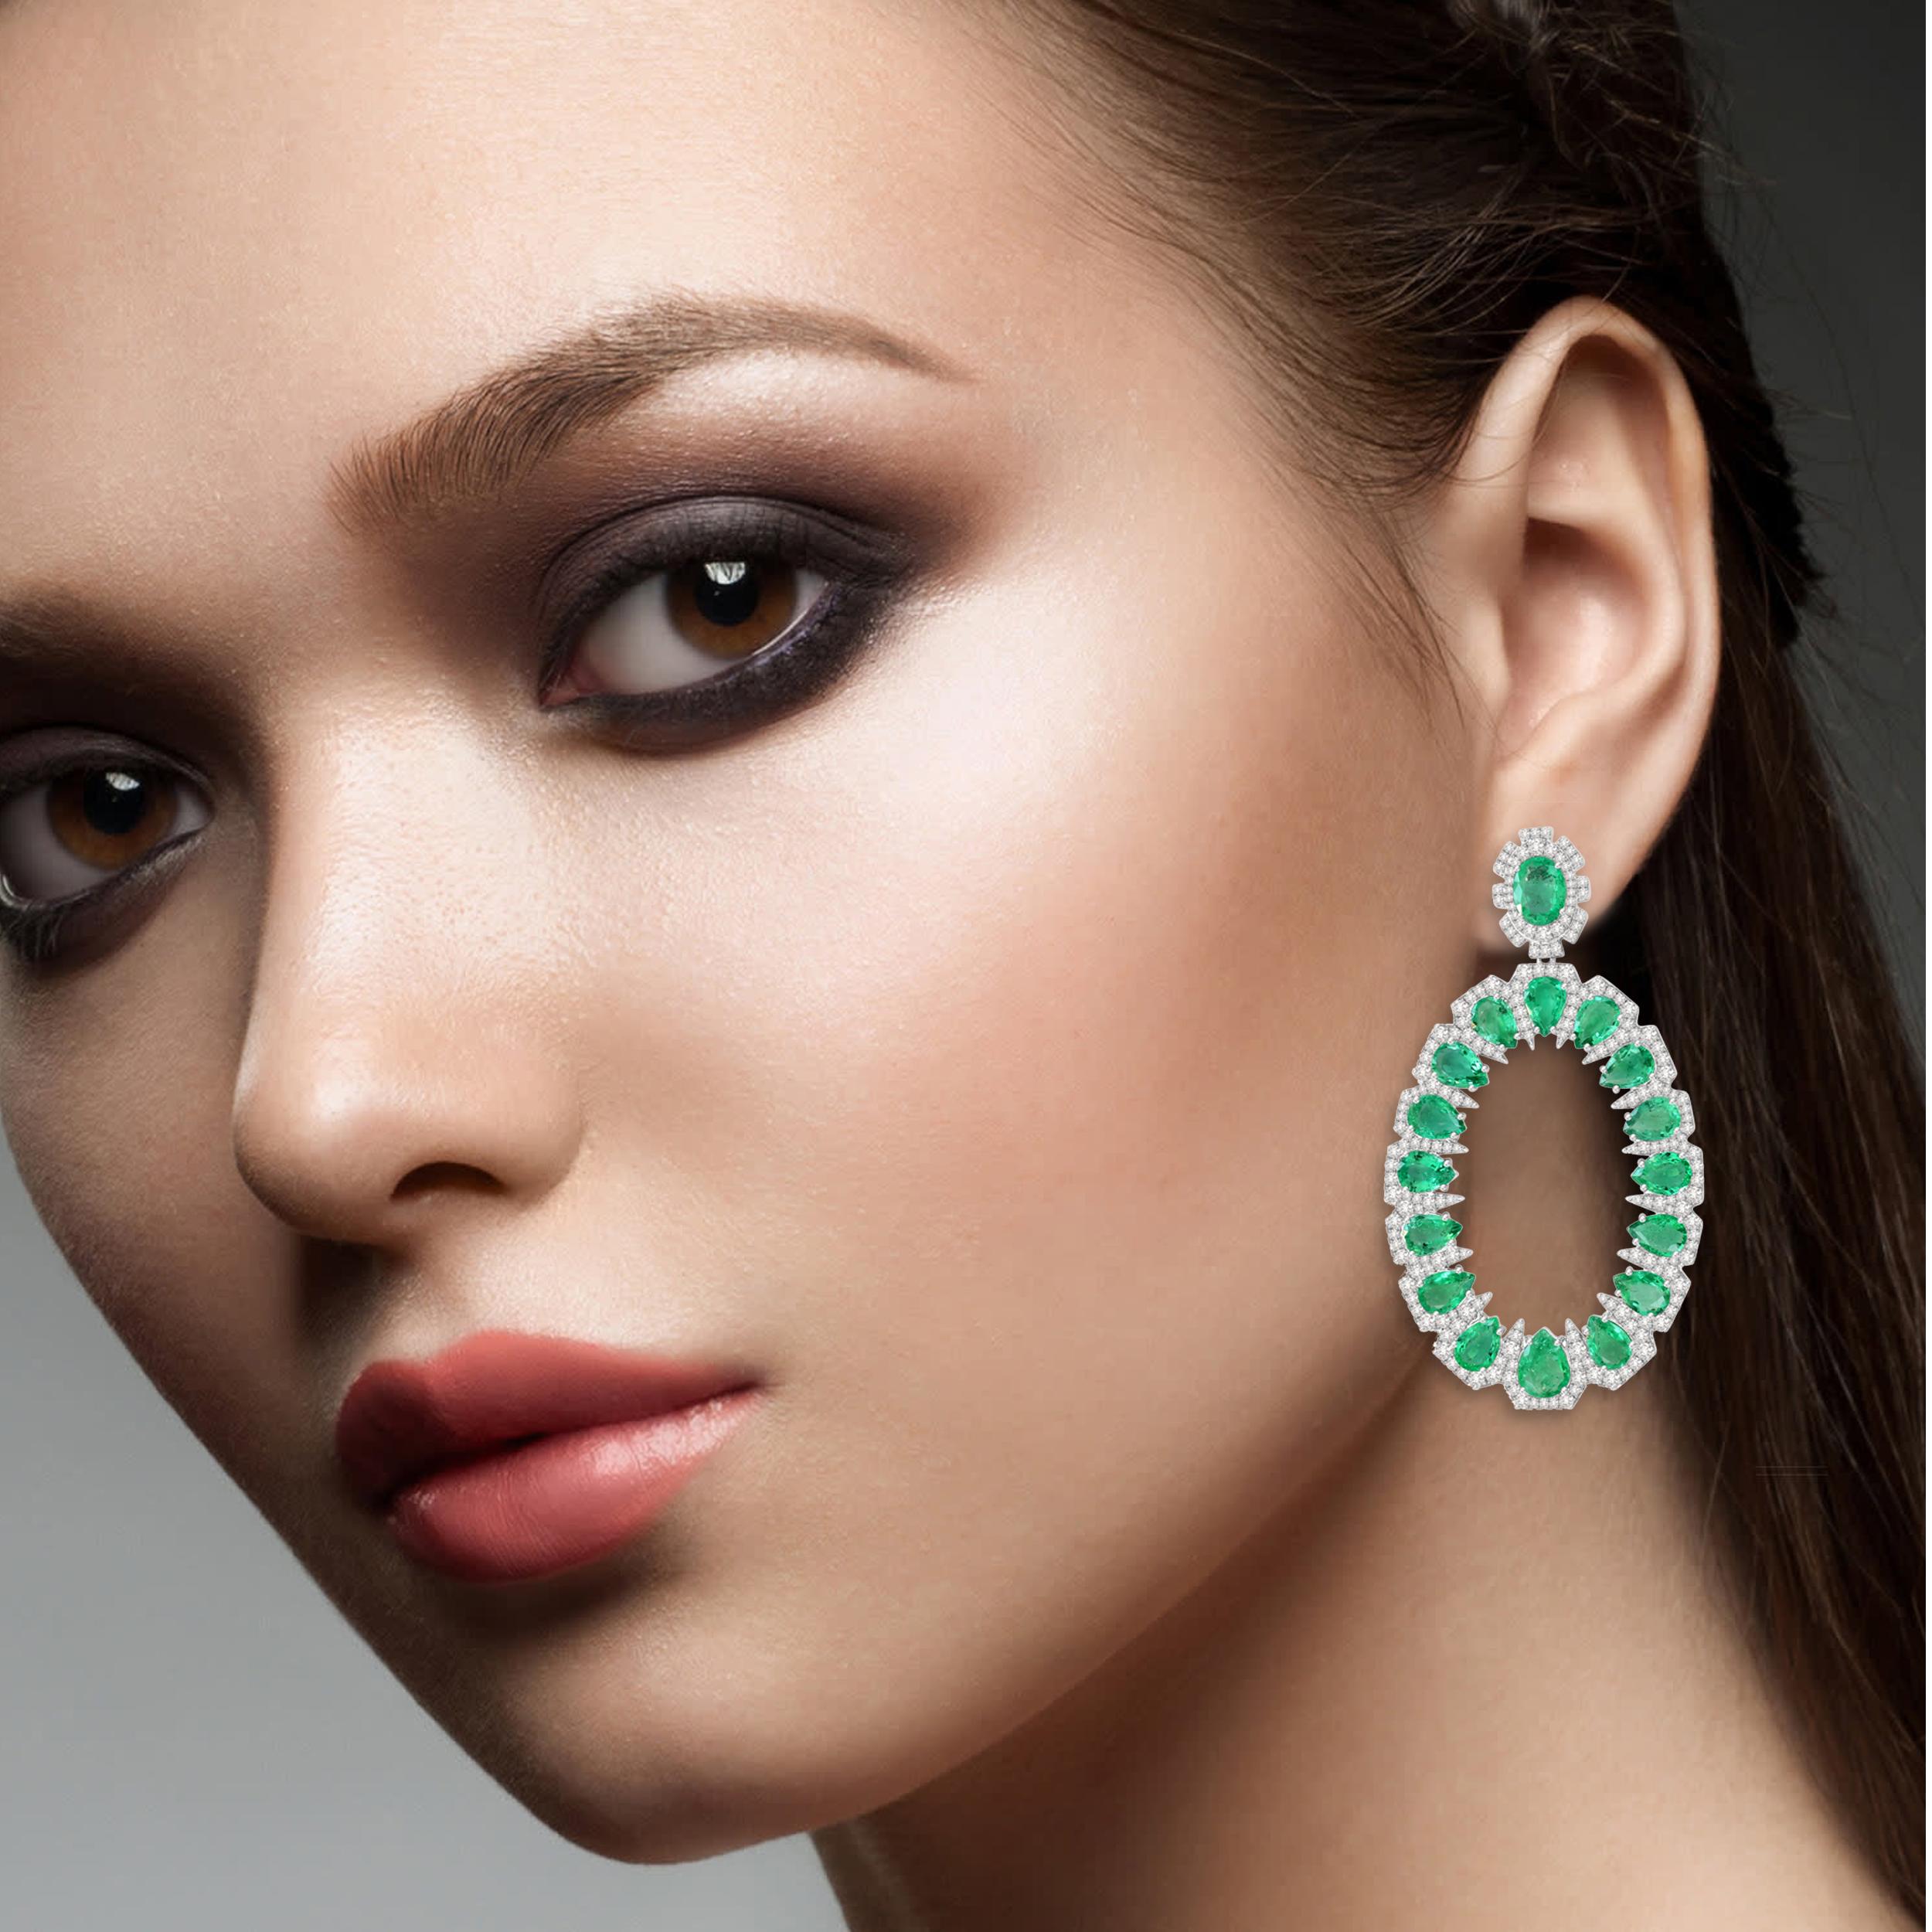 These stunning earrings are handcrafted in 14-karat gold. It is set in 20.43 carats emerald and 5.34 carats of sparkling diamonds.

FOLLOW MEGHNA JEWELS storefront to view the latest collection & exclusive pieces. Meghna Jewels is proudly rated as a